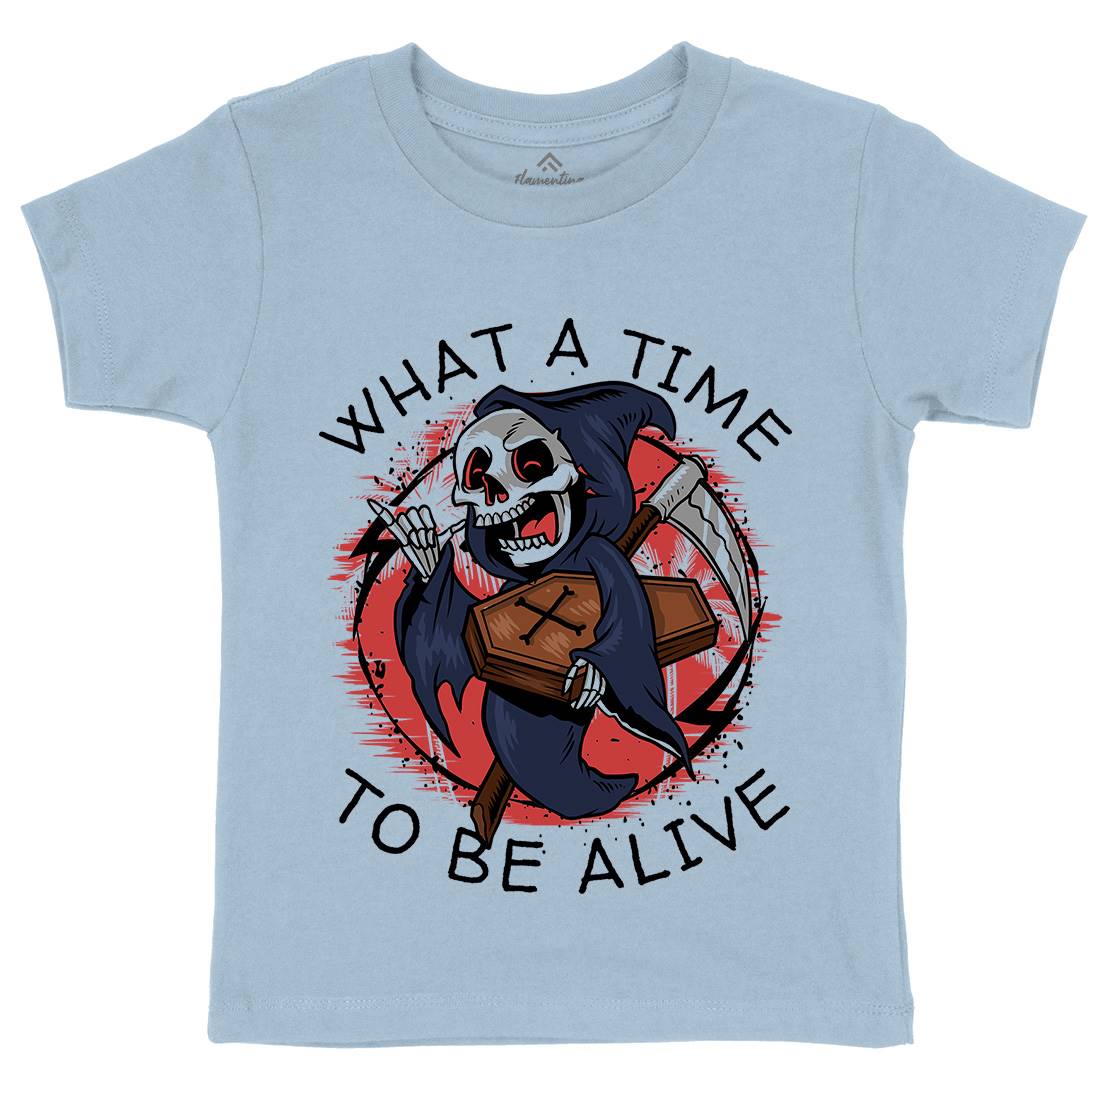 What A Time To Be Alive Kids Organic Crew Neck T-Shirt Funny D096